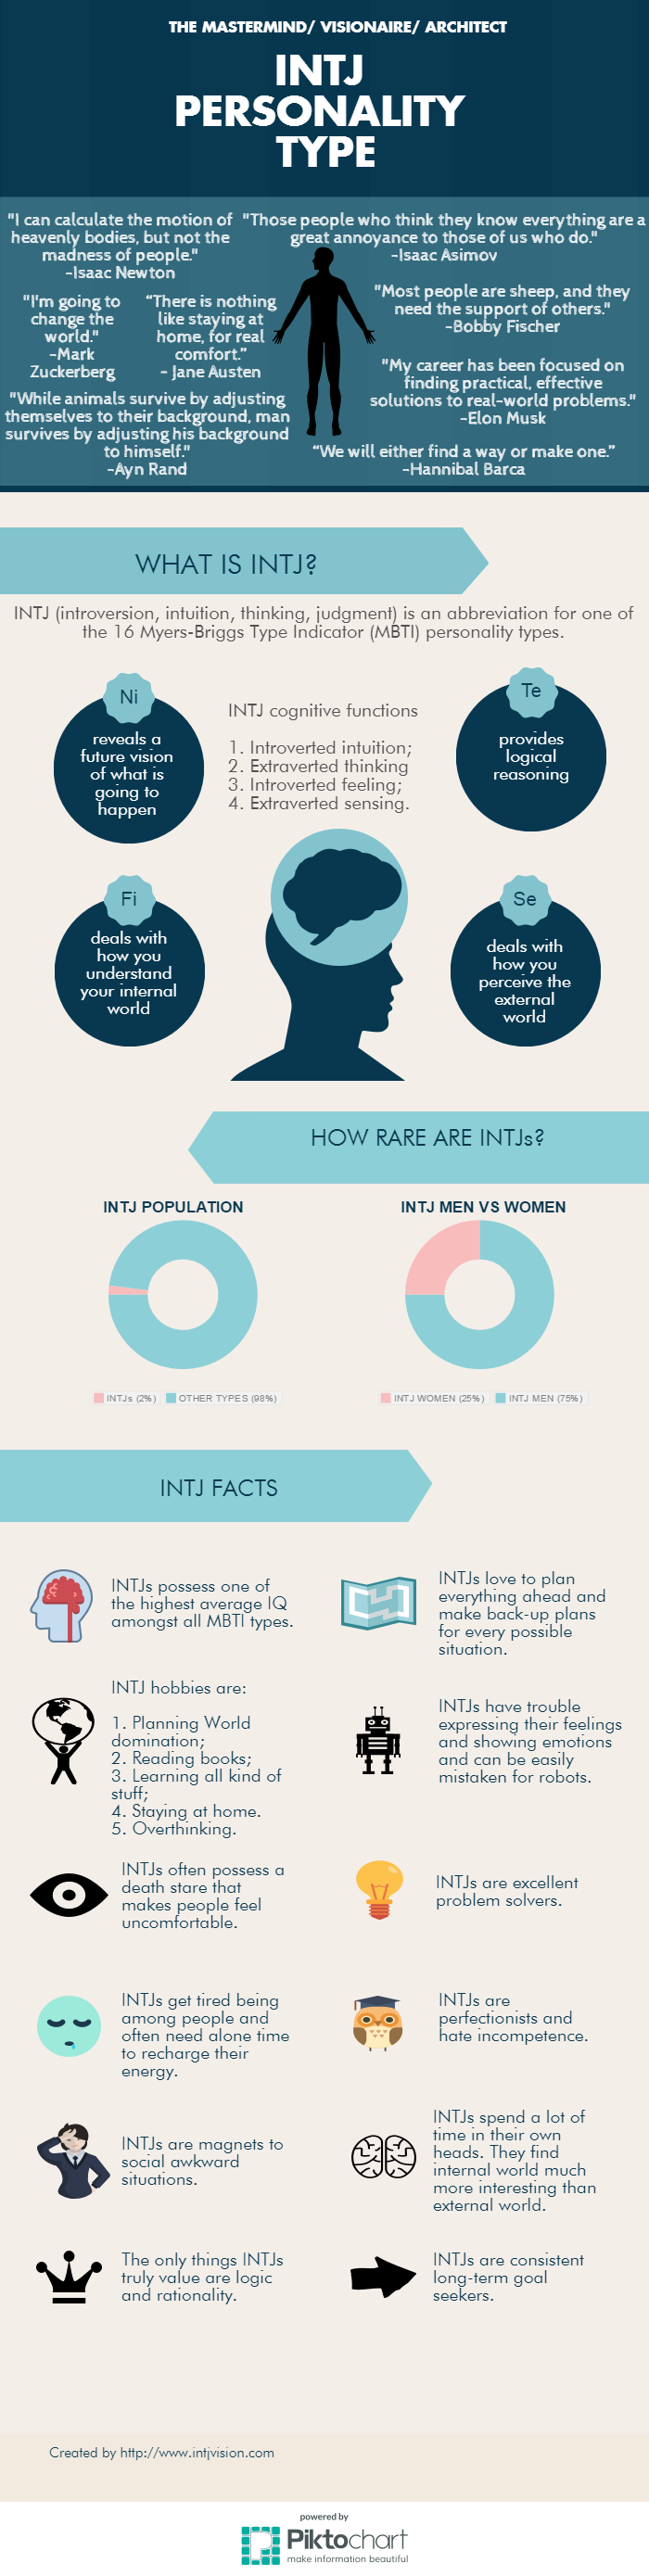 INTJ personality type infographic